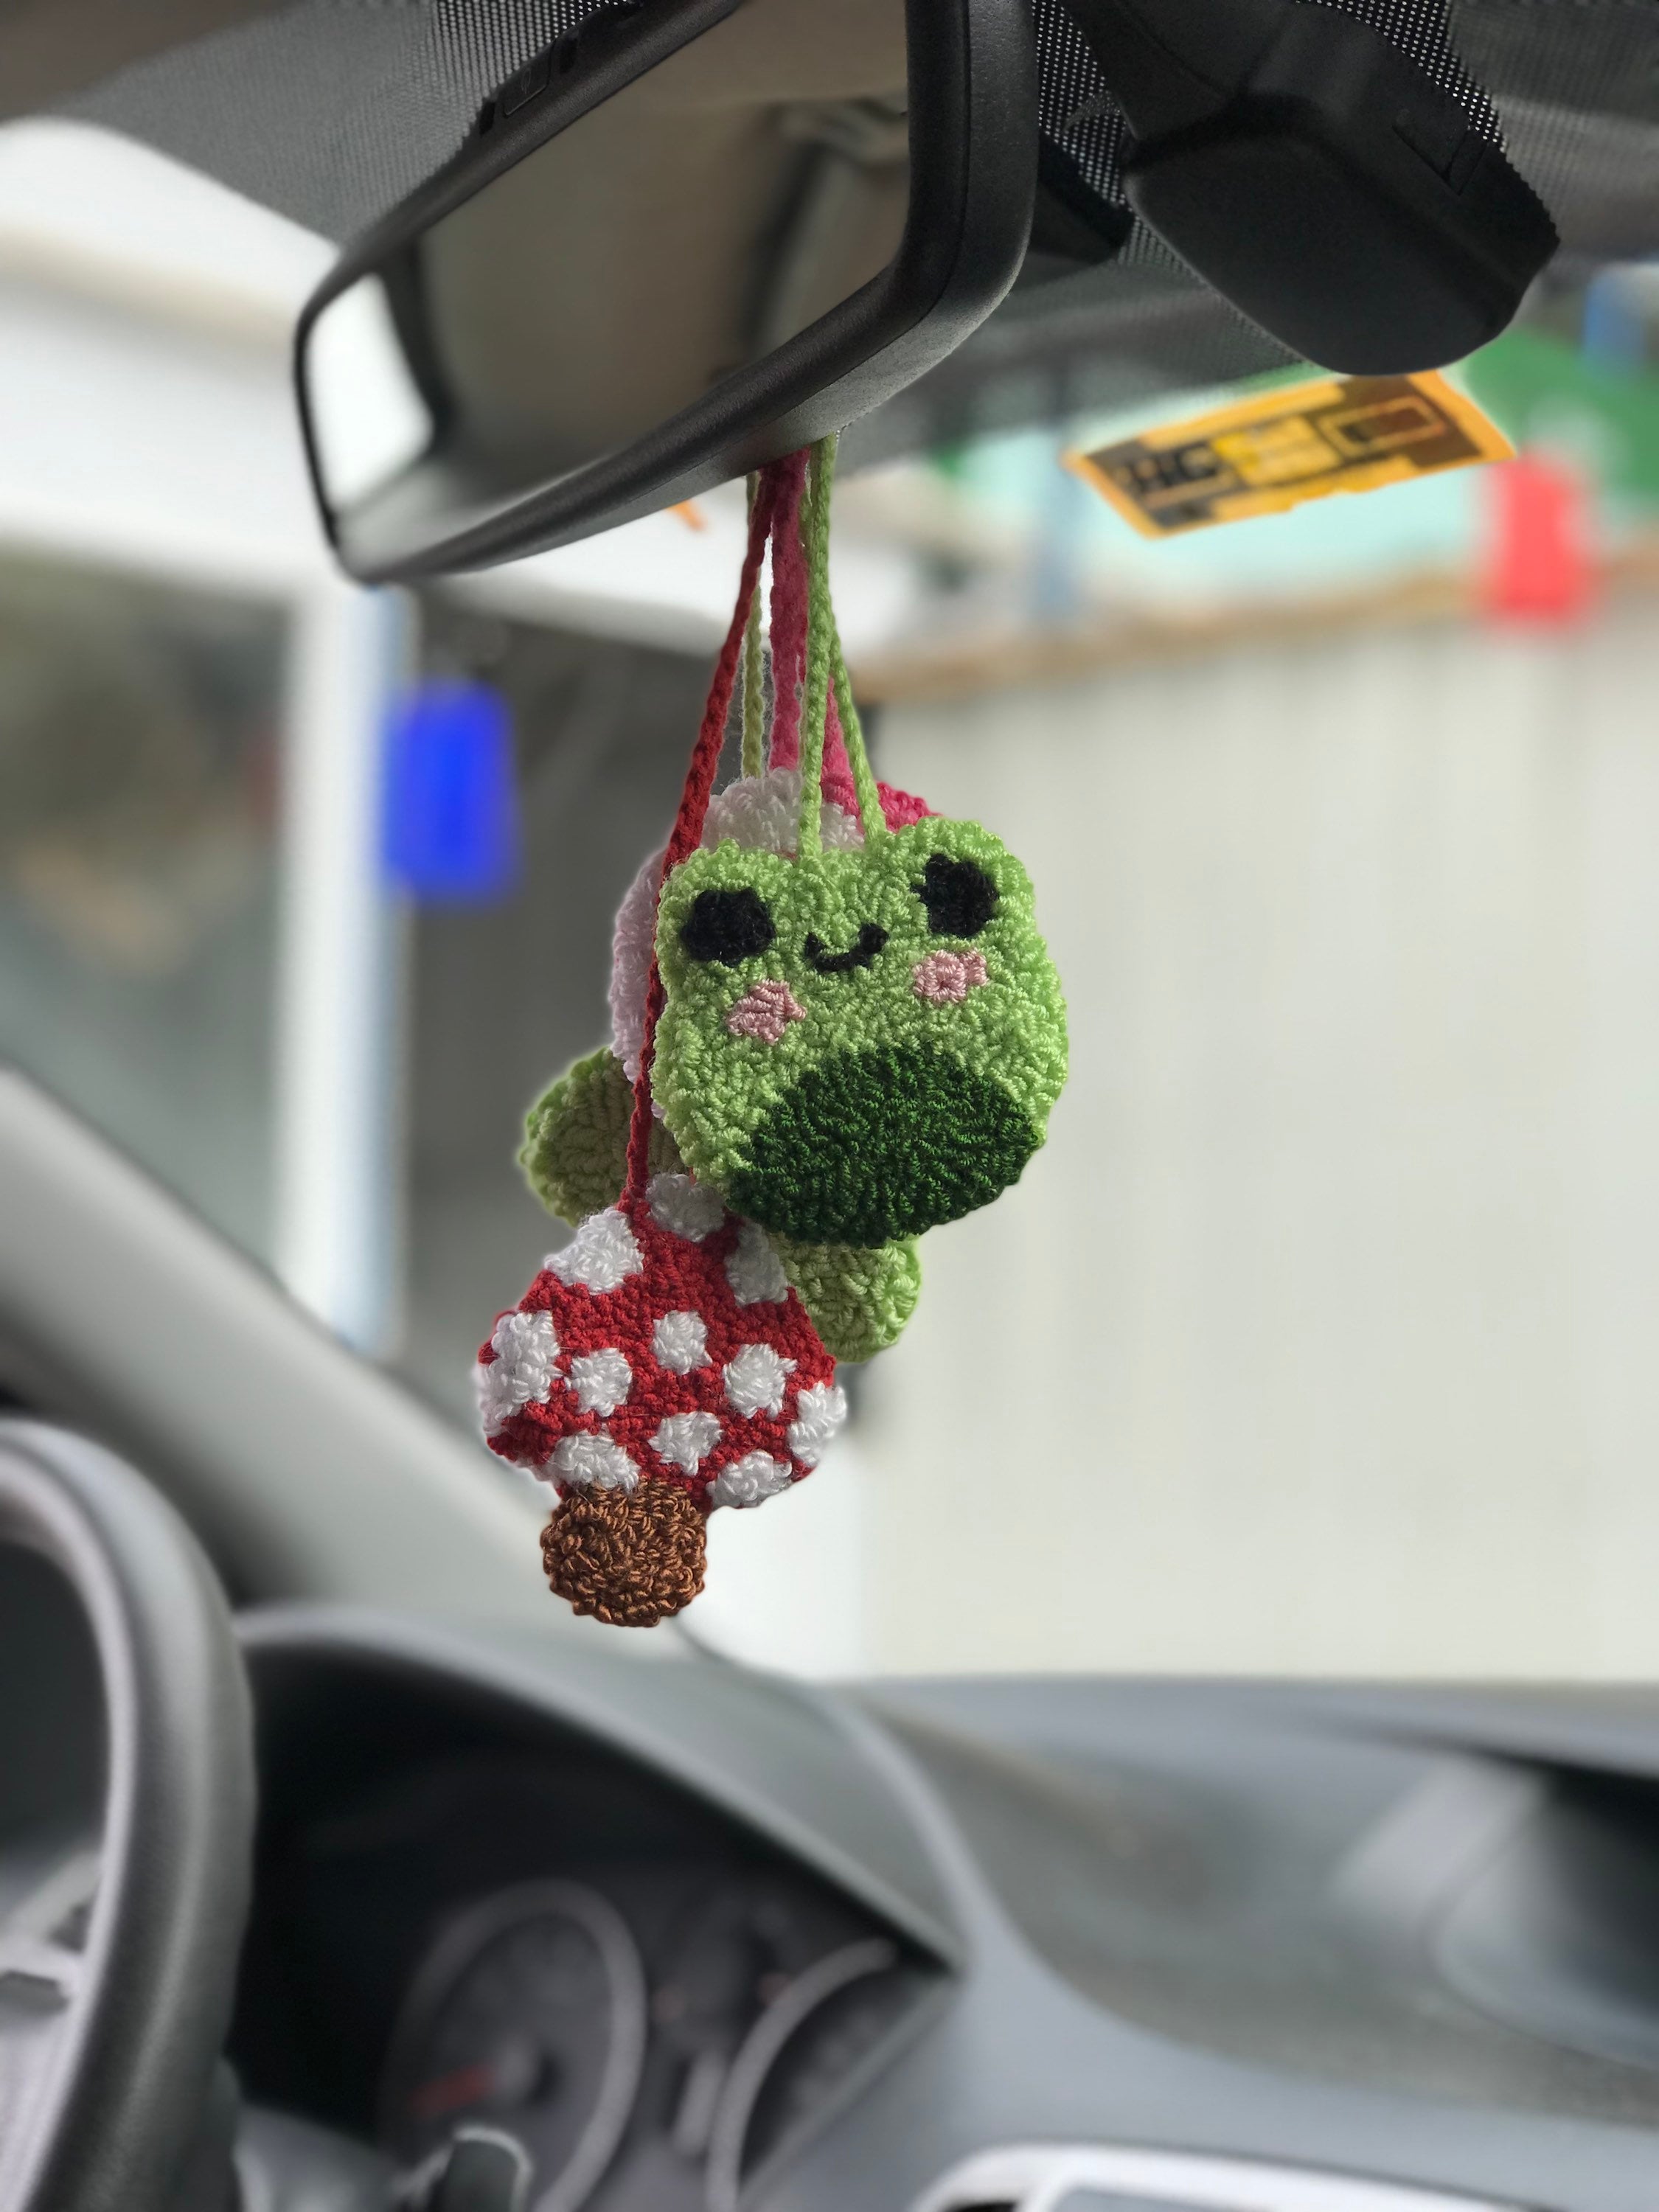 Heart Car Rear View Mirror Accessory, Crochet Red Heart Car Hanging, Car  Accessory for Women 